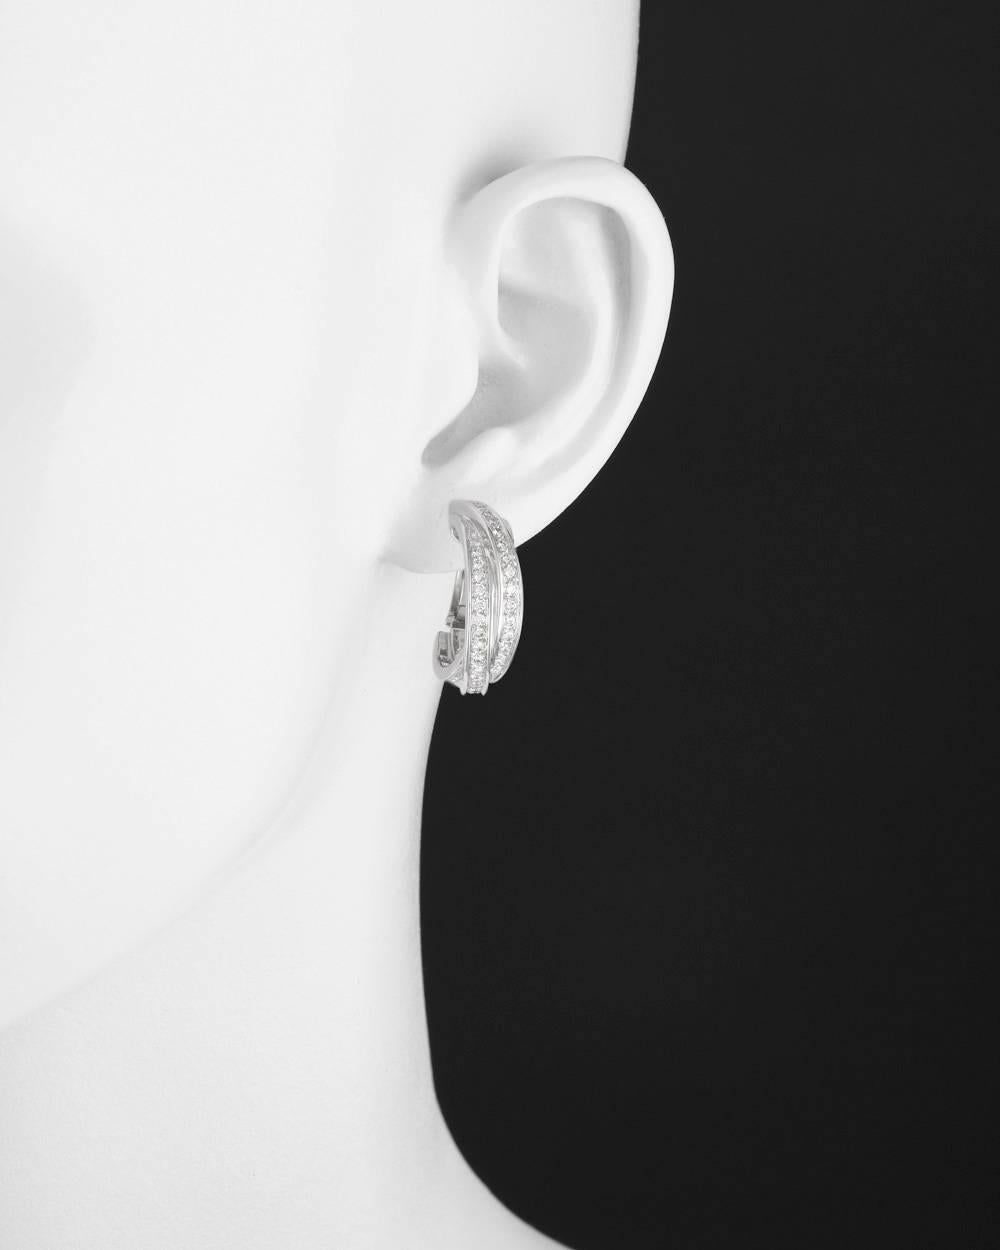 'Trinity' hoop earrings, designed as three interlocking diamond-set bands, mounted in 18k white gold, with clip backs and posts, numbered 836557, signed Cartier. High-grade round diamonds weighing approximately 1.00 total carats. 1